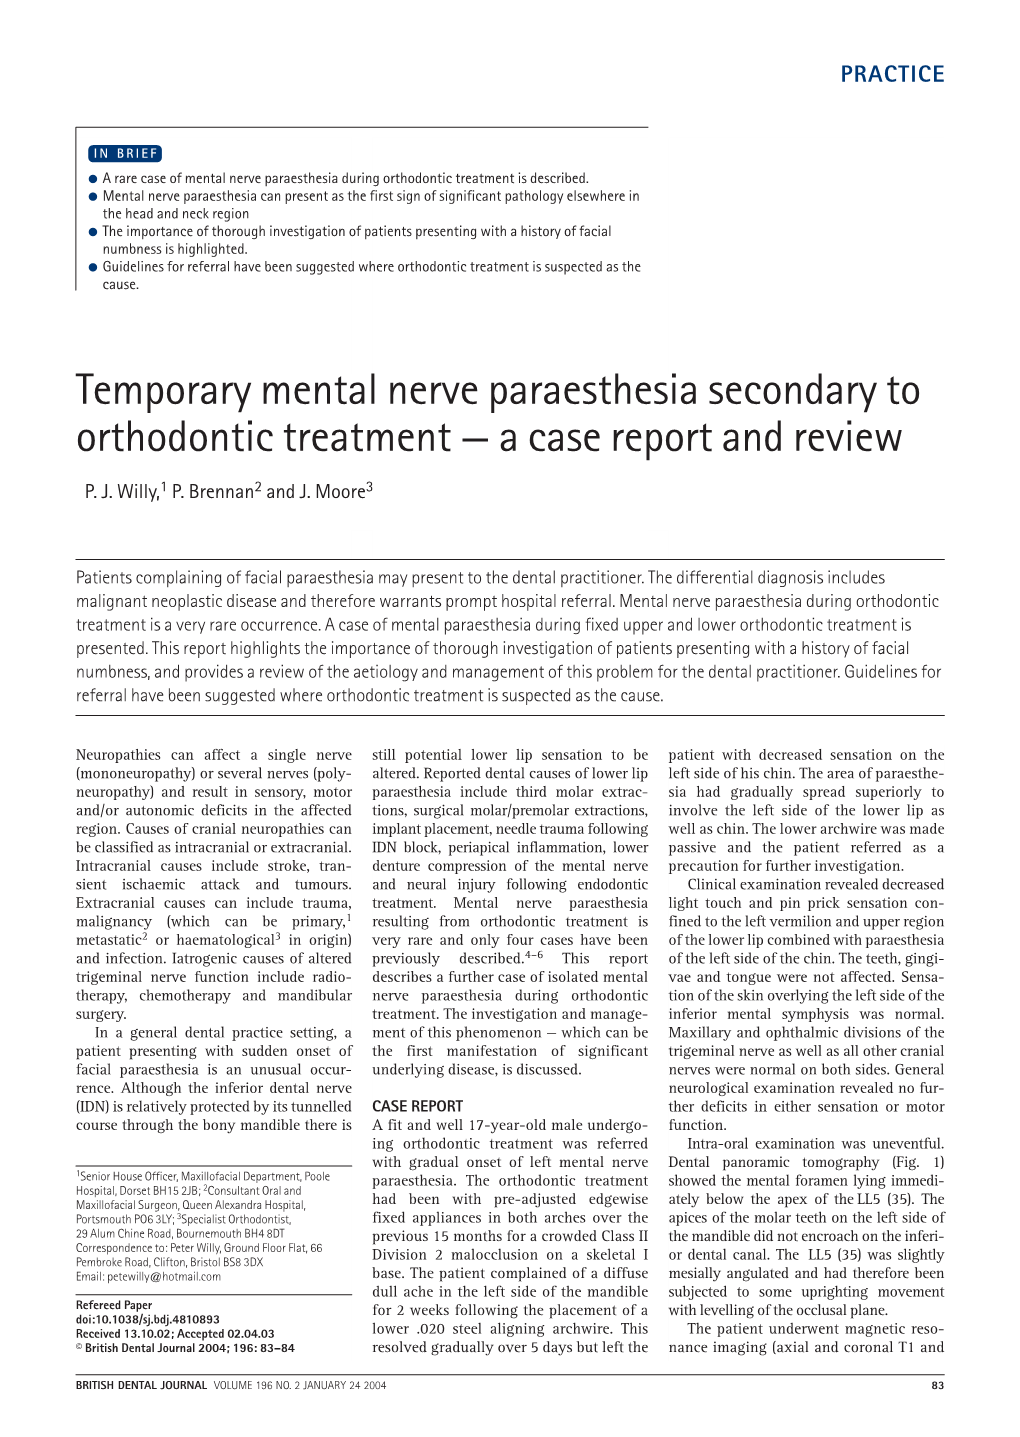 Temporary Mental Nerve Paraesthesia Secondary to Orthodontic Treatment — a Case Report and Review